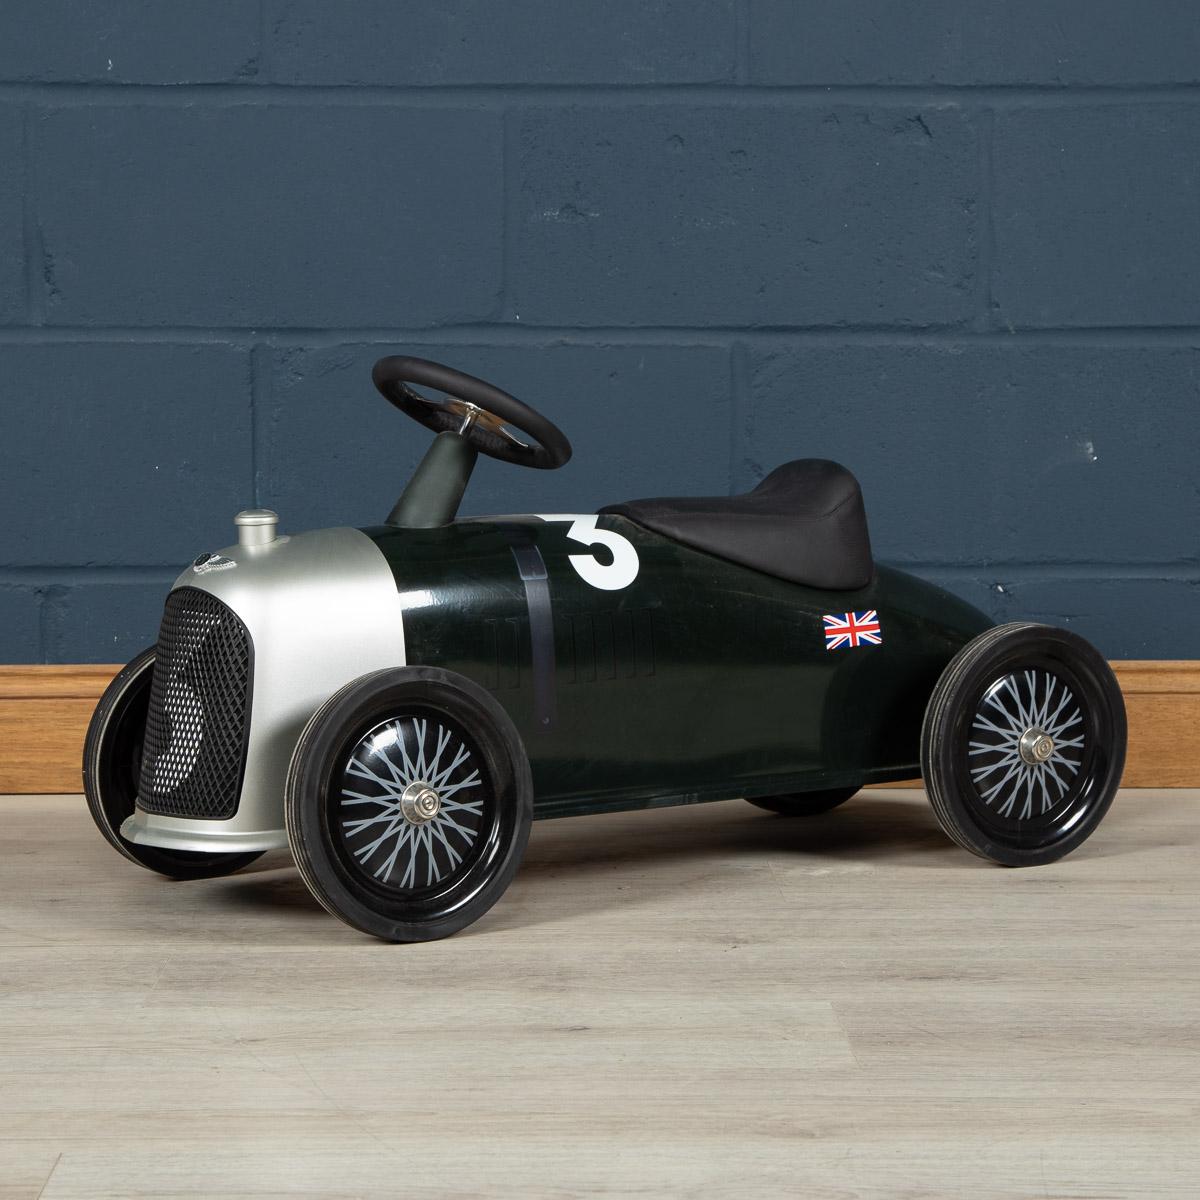 A superb child’s toy car of metal construction, aerodynamic design, deep green racing colour, chrome grill, Bentley logo, black leather seat and steering wheel, large wheels with real rubber tyres. Beautiful little gift or just as a piece of artwork